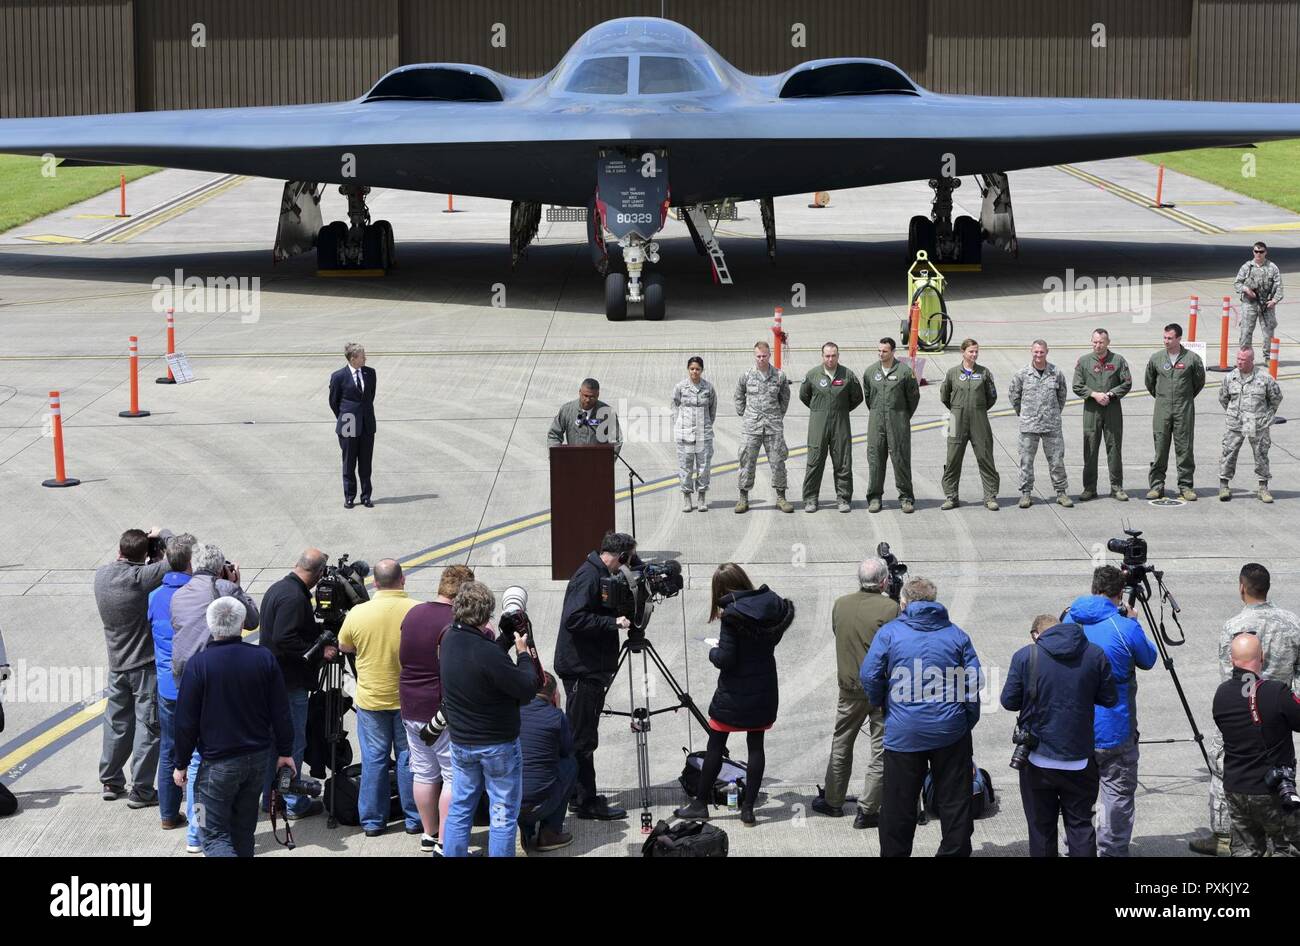 Lt. Gen. Richard Clark, 3rd Air Force commander, addresses news reporters in front of a 'tri-bomber' formation of a B-52H Stratofortress, a B-1B Lancer and a B-2 Spirit, during a media day event at RAF Fairford, U.K., June 12, 2017.  The event marked the first time in history that all three of Air Force Global Strike Command's strategic bomber aircraft simultaneously deployed to the European Theater as part of bomber assurance and deterrence operations. The forward presence of bomber aircraft and Airmen assists in maintaining high readiness for global reach capabilities. Stock Photo